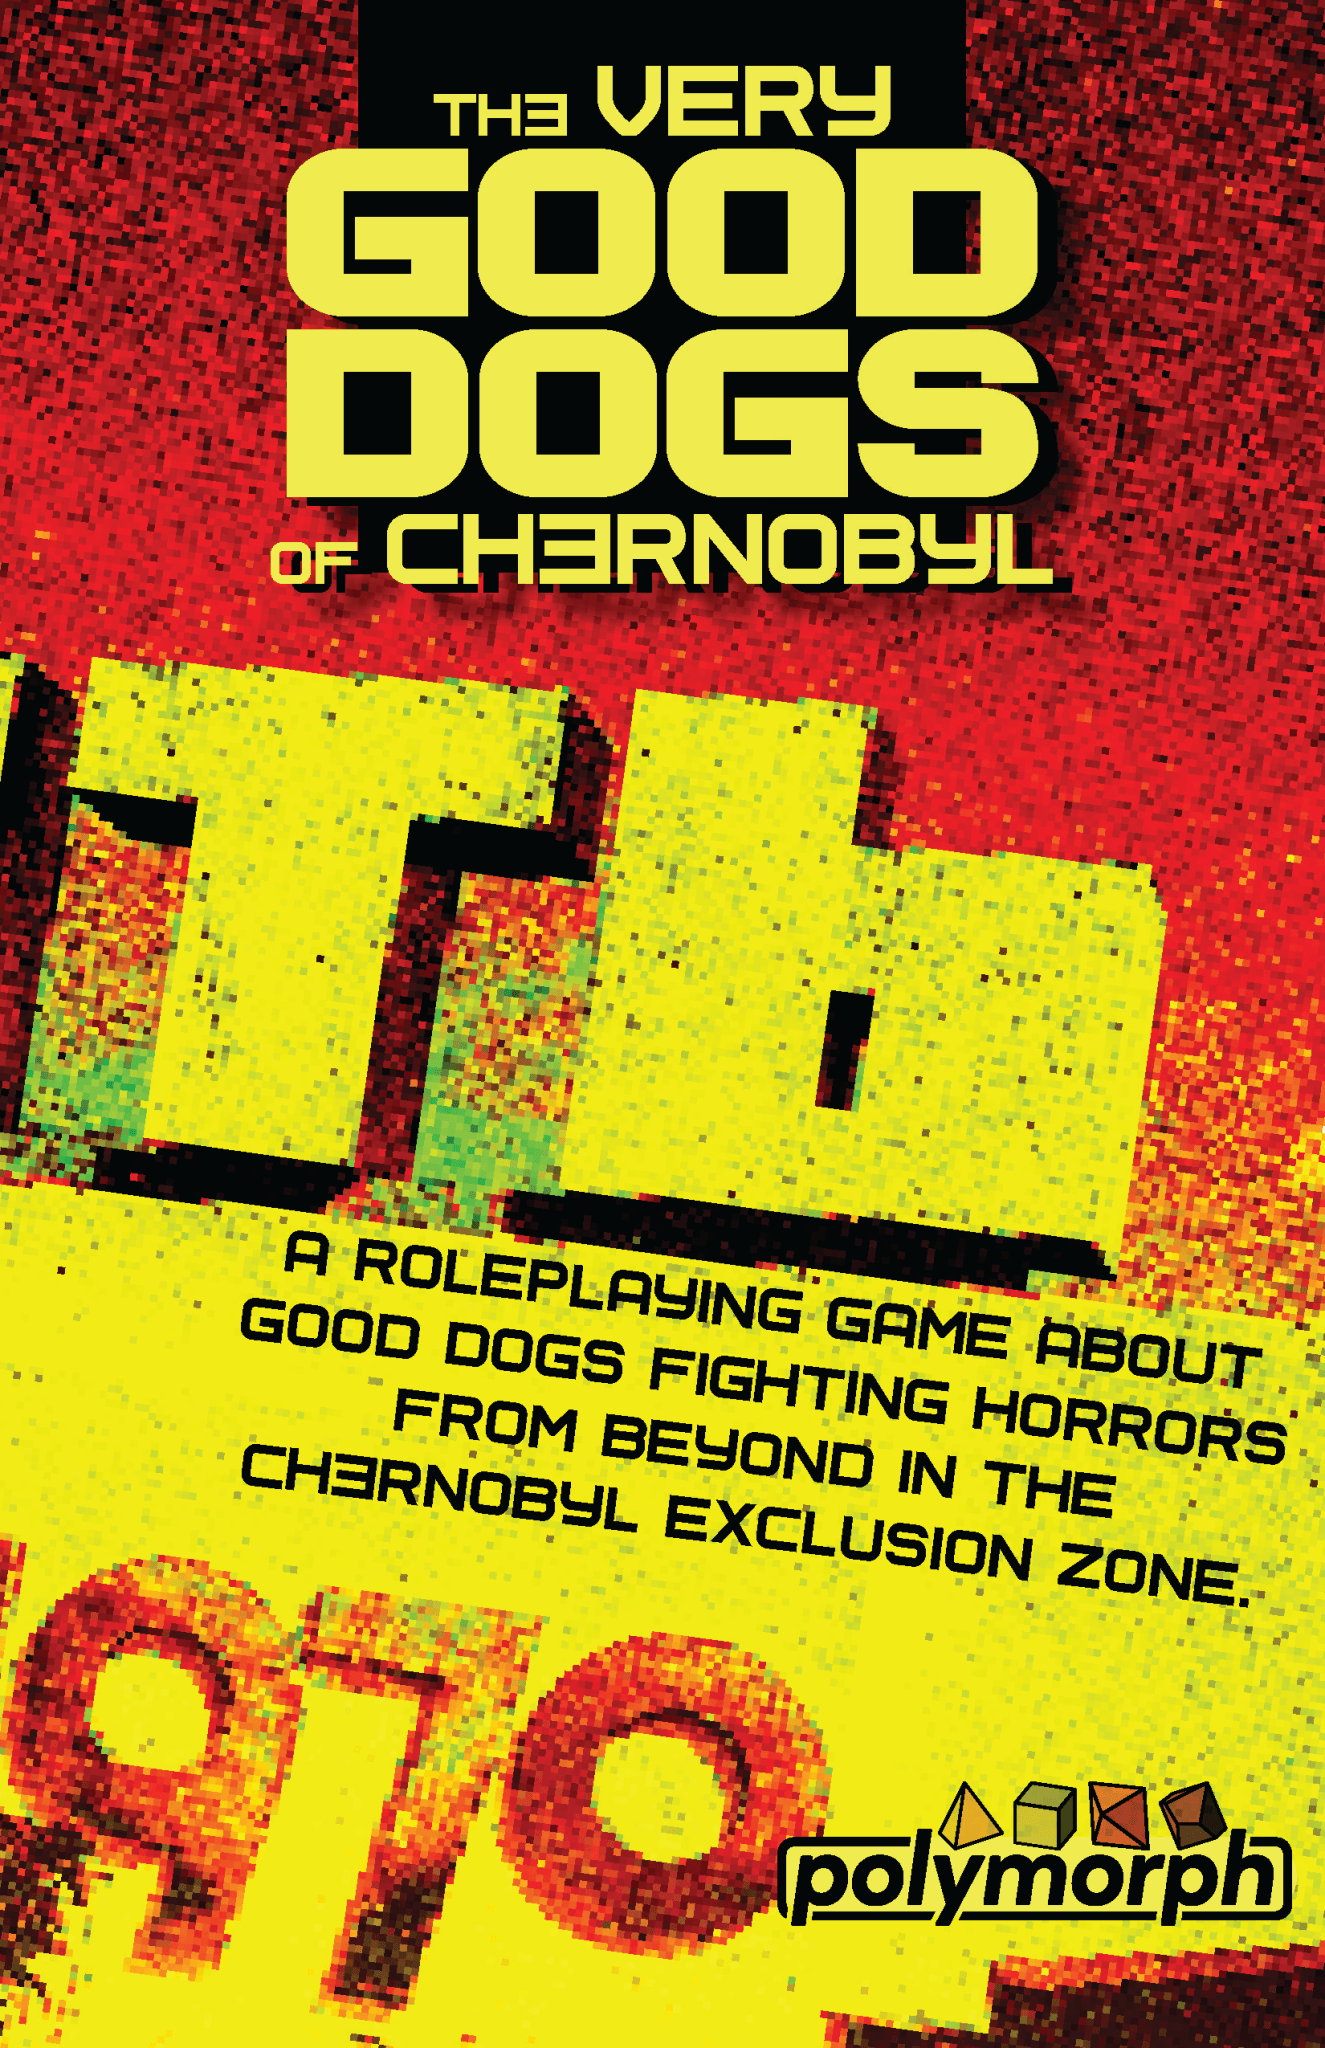 The Very Good Dogs of Chernobyl + PDF - Exalted Funeral